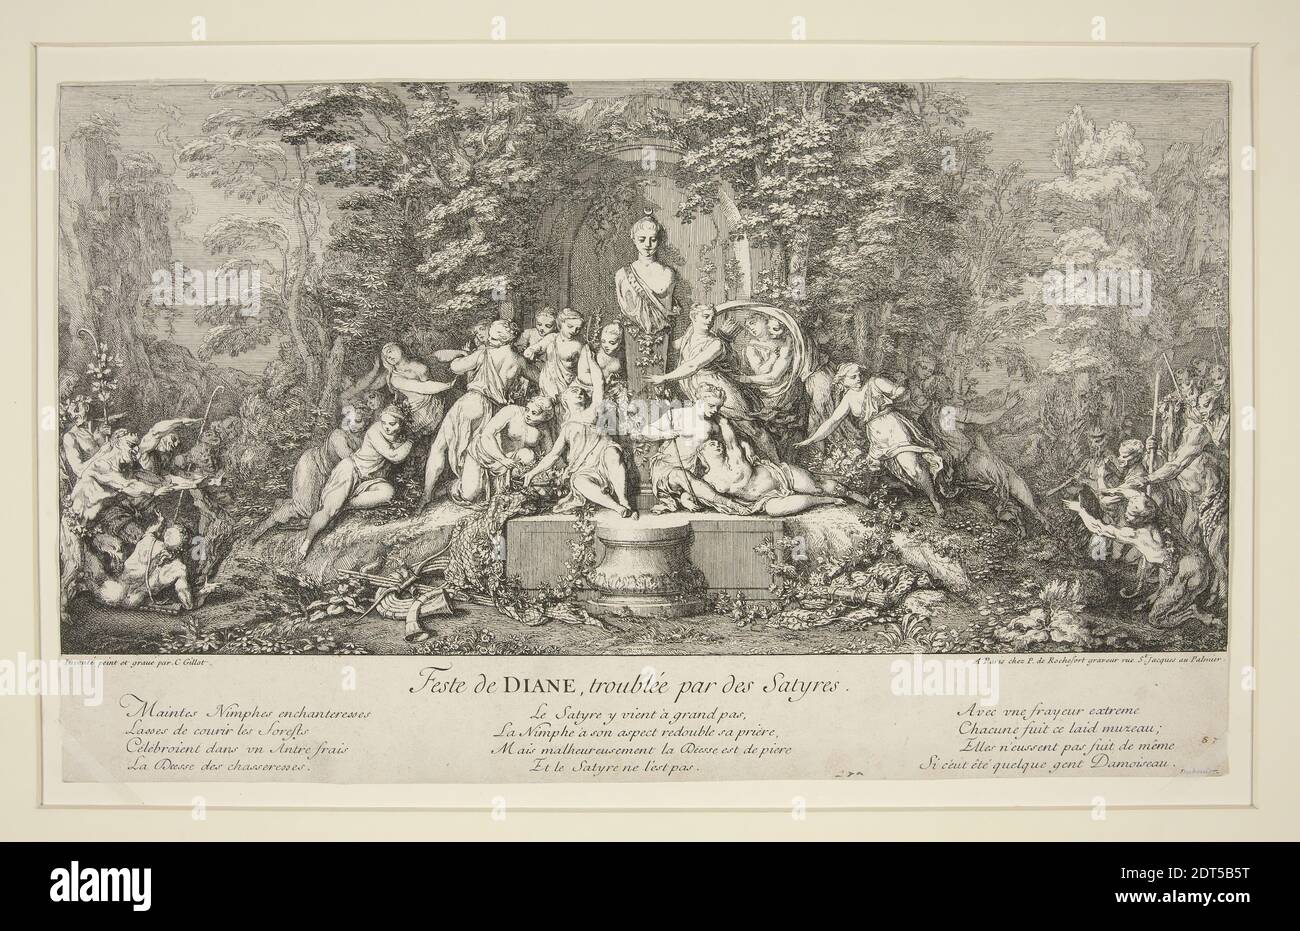 Artist: Claude Gillot, French, 1673–1722, Feste de DIANE, troublée par des Satyres, ca. 1707, Etching and engraving (No. 1 of Les Bacchanales), image: 6 3/4 × 13 15/16 in. (17.1 × 35.4 cm), French, 18th century, Works on Paper - Prints Stock Photo